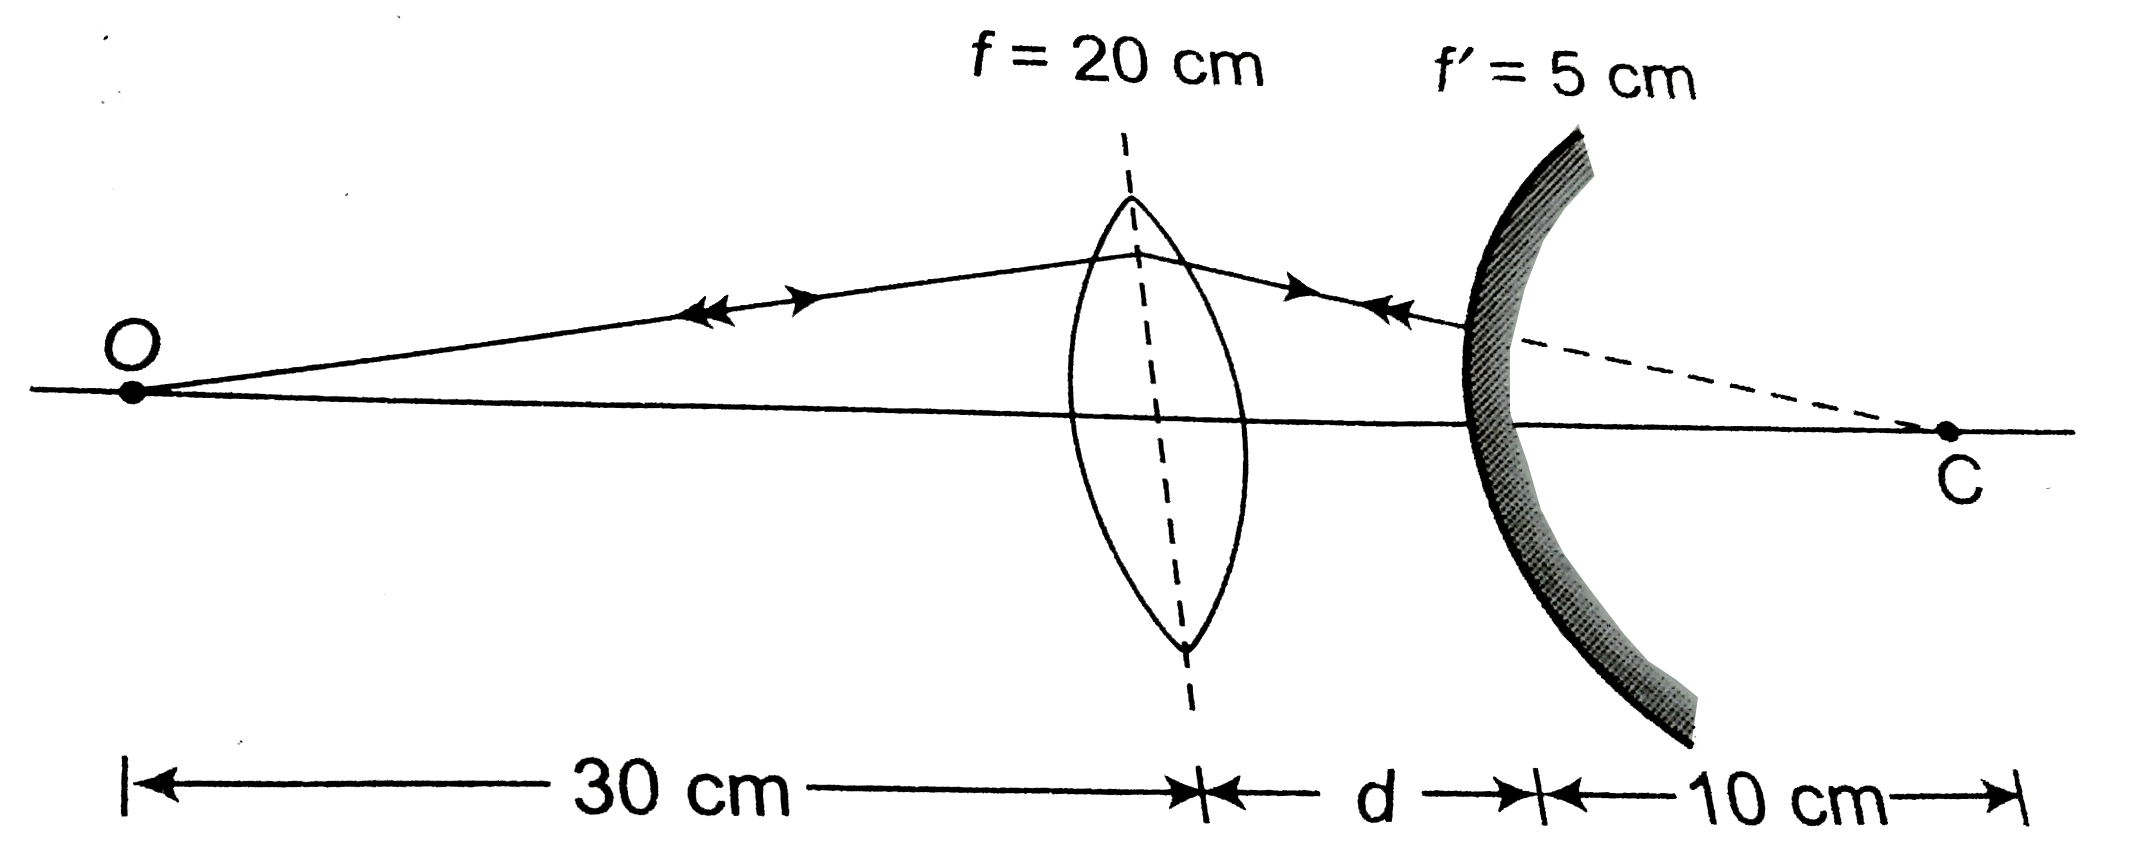 A Luminous Object Is Placed At A Distance Of 30 Cm From The Convex Lens Of Focal Length 20 Cm On The Other Side Of The Lens At What Distance From Thelens